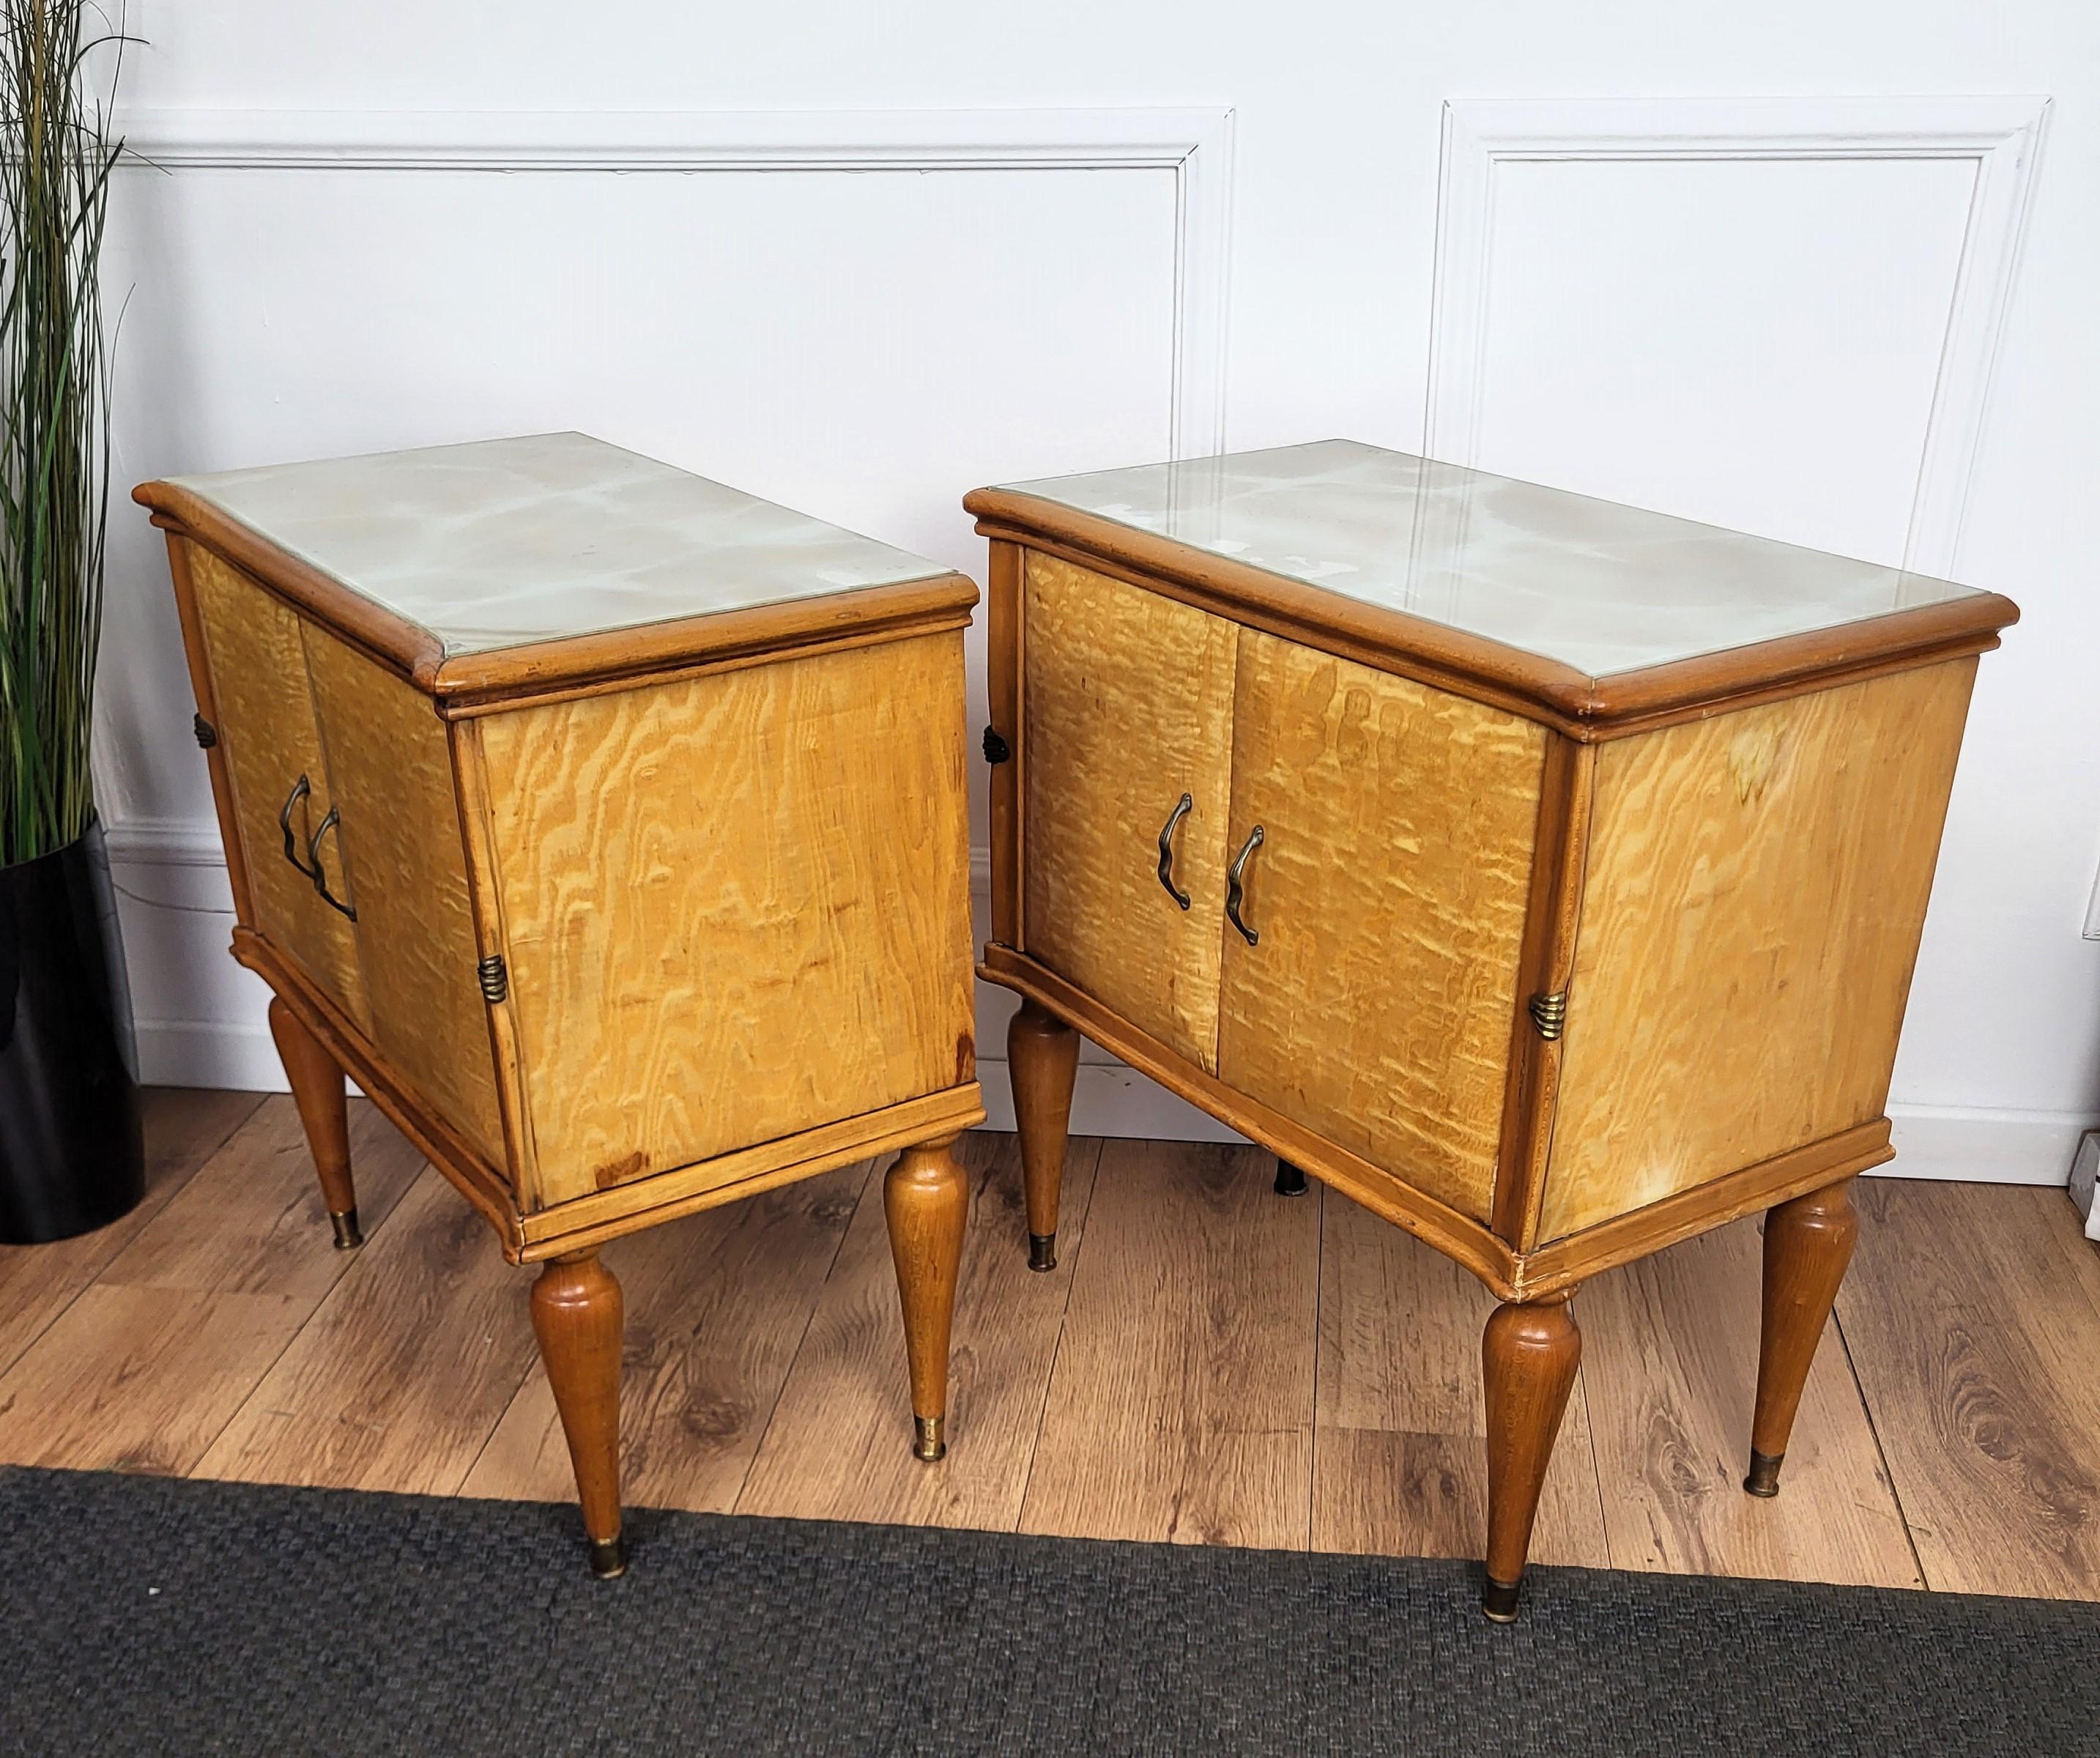 Brass Pair of Italian Mid-Century Modern Nightstands Bedside Tables Maple & Glass Top